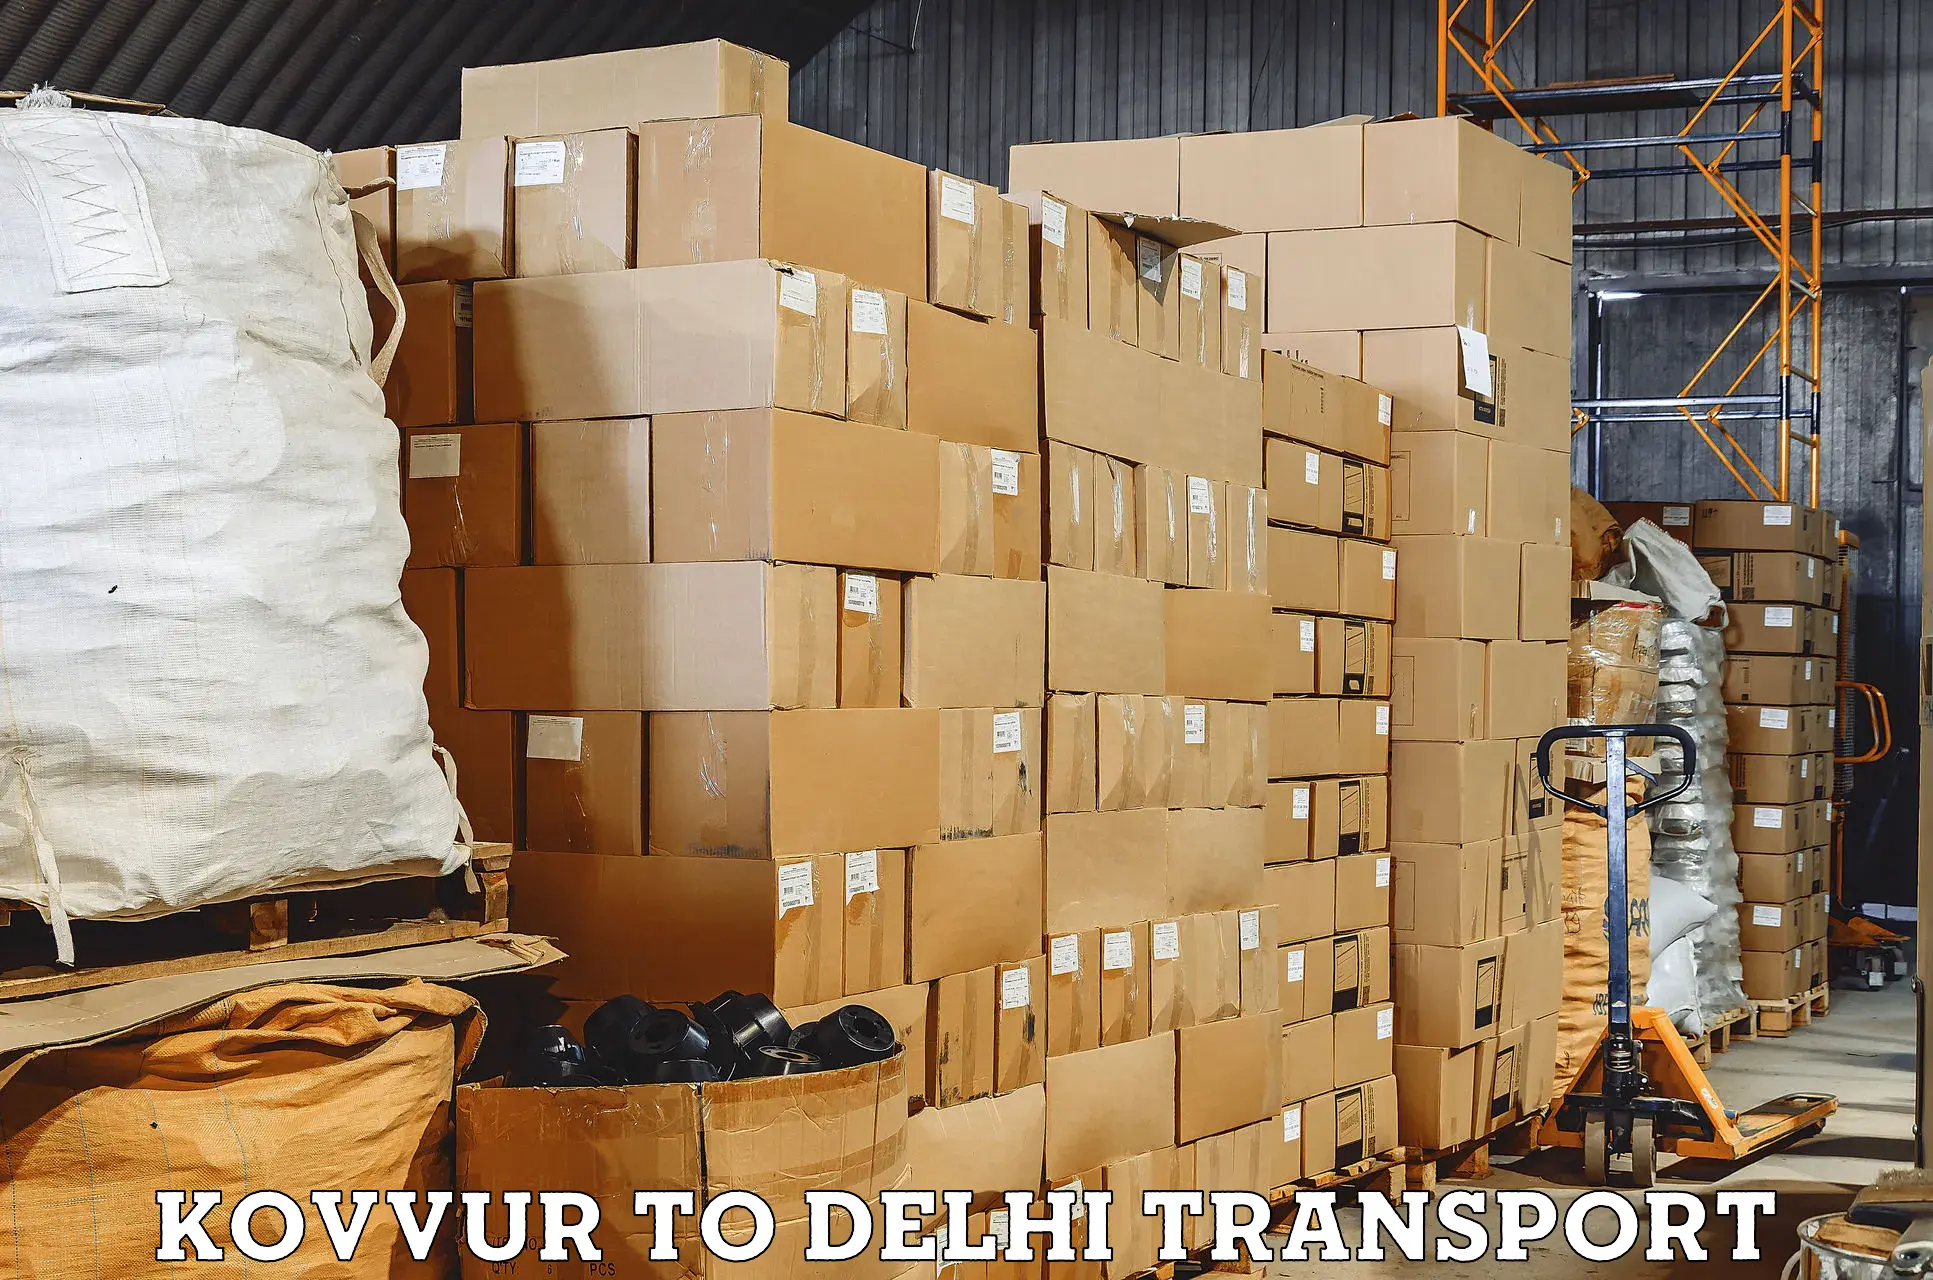 Daily transport service Kovvur to Lodhi Road